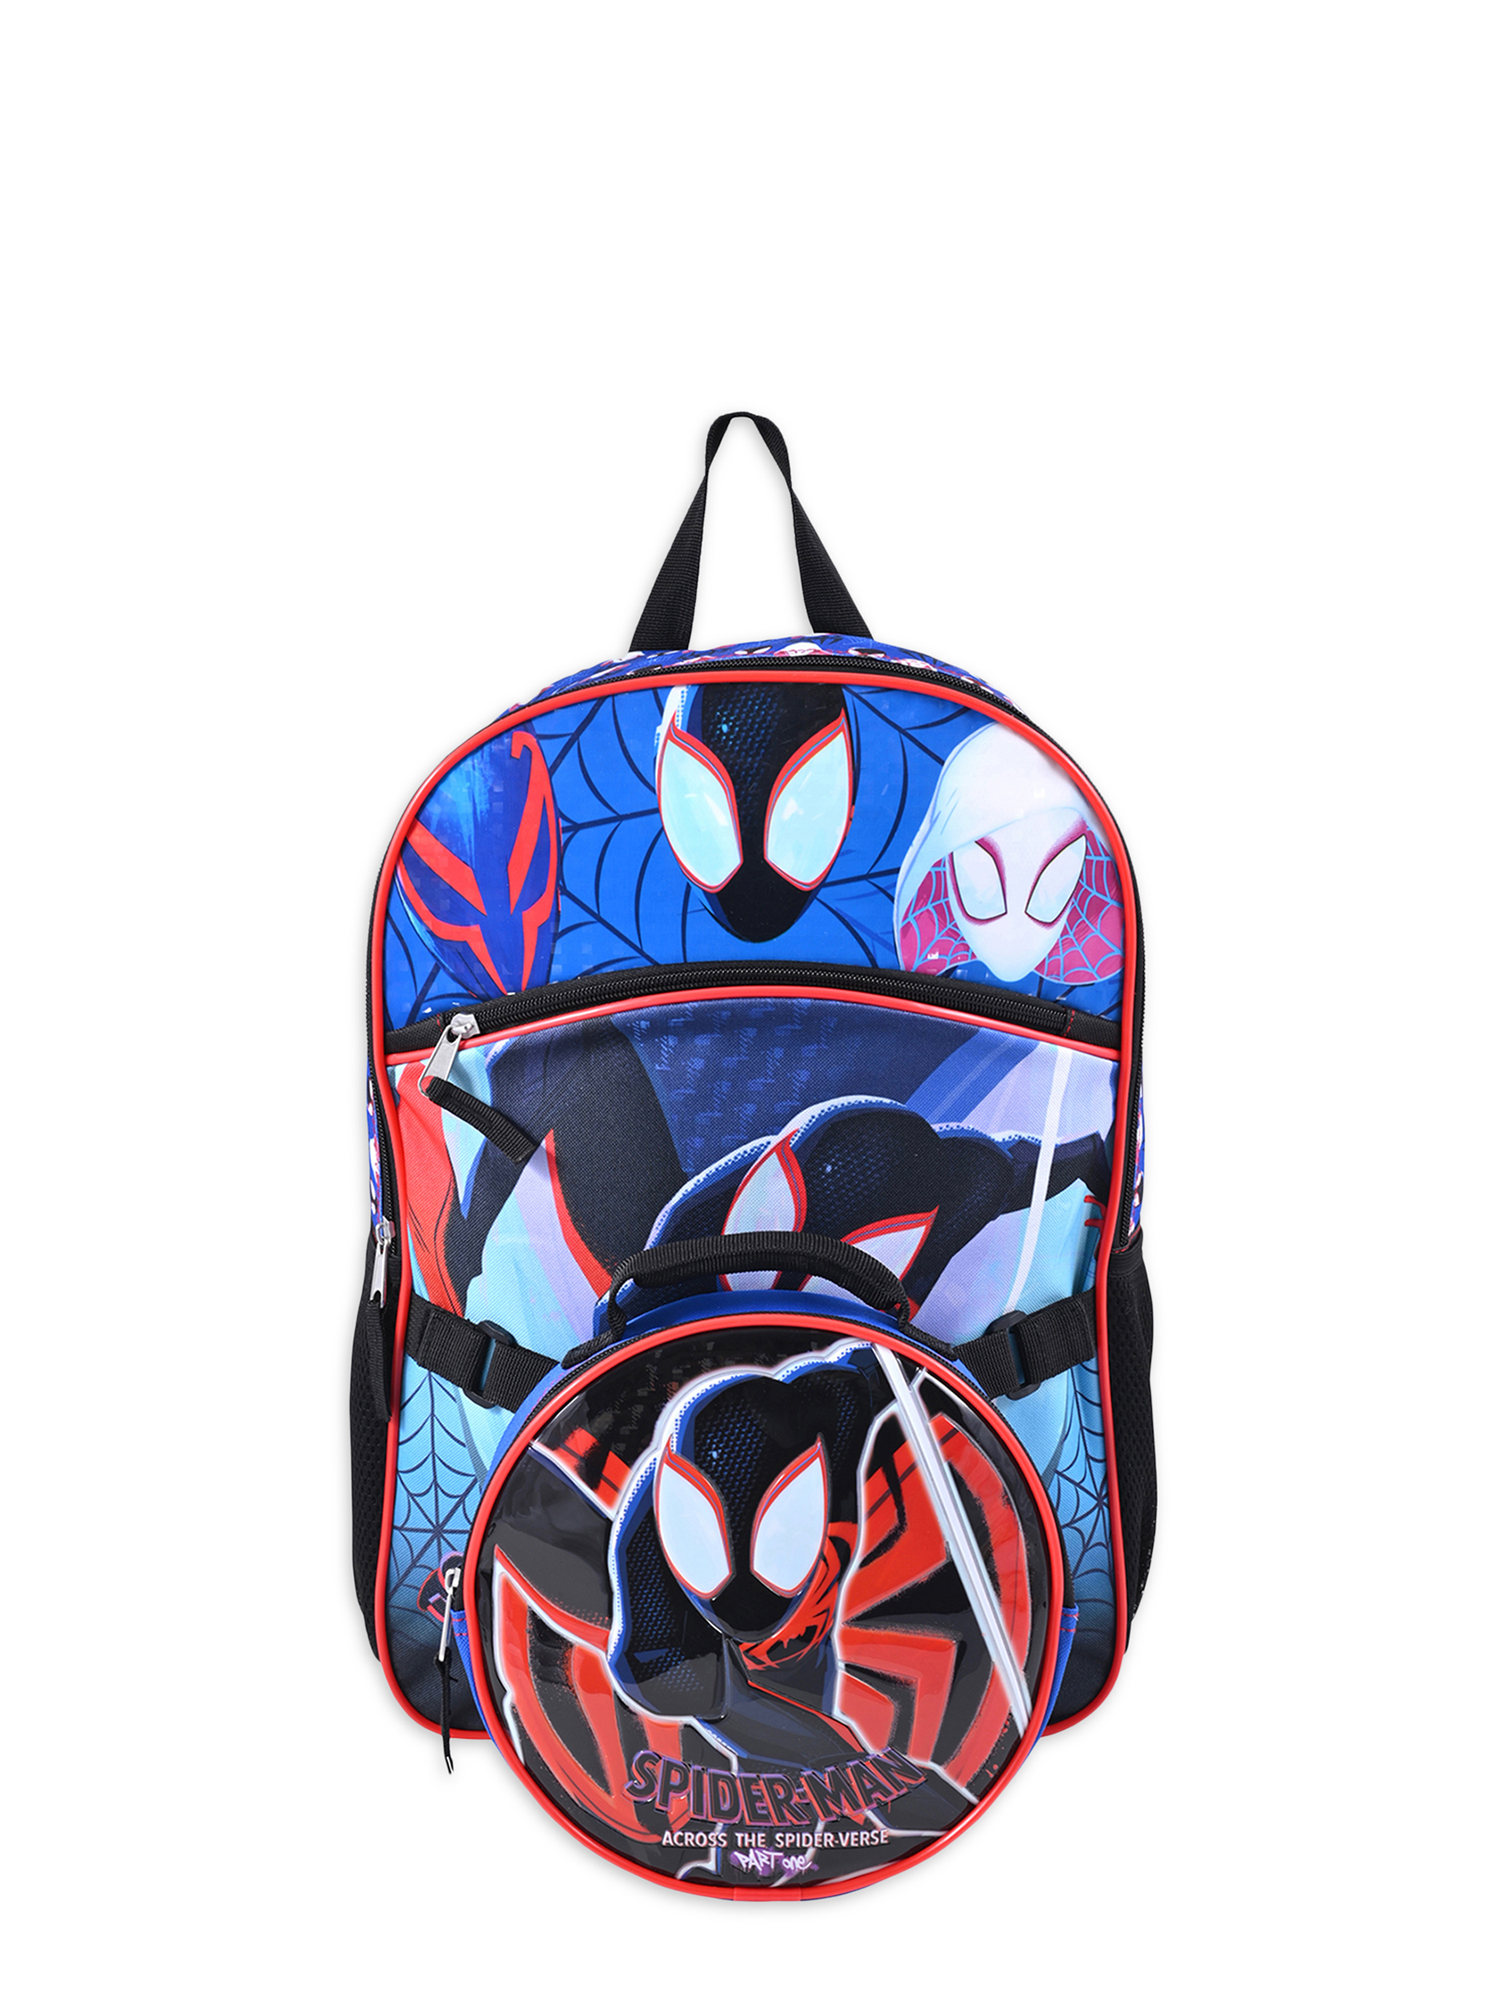 Marvel Spider-Man Across the Spider-Verse Boys 17" Laptop Backpack 2-Piece Set with Lunch Bag, Black Blue - image 1 of 9